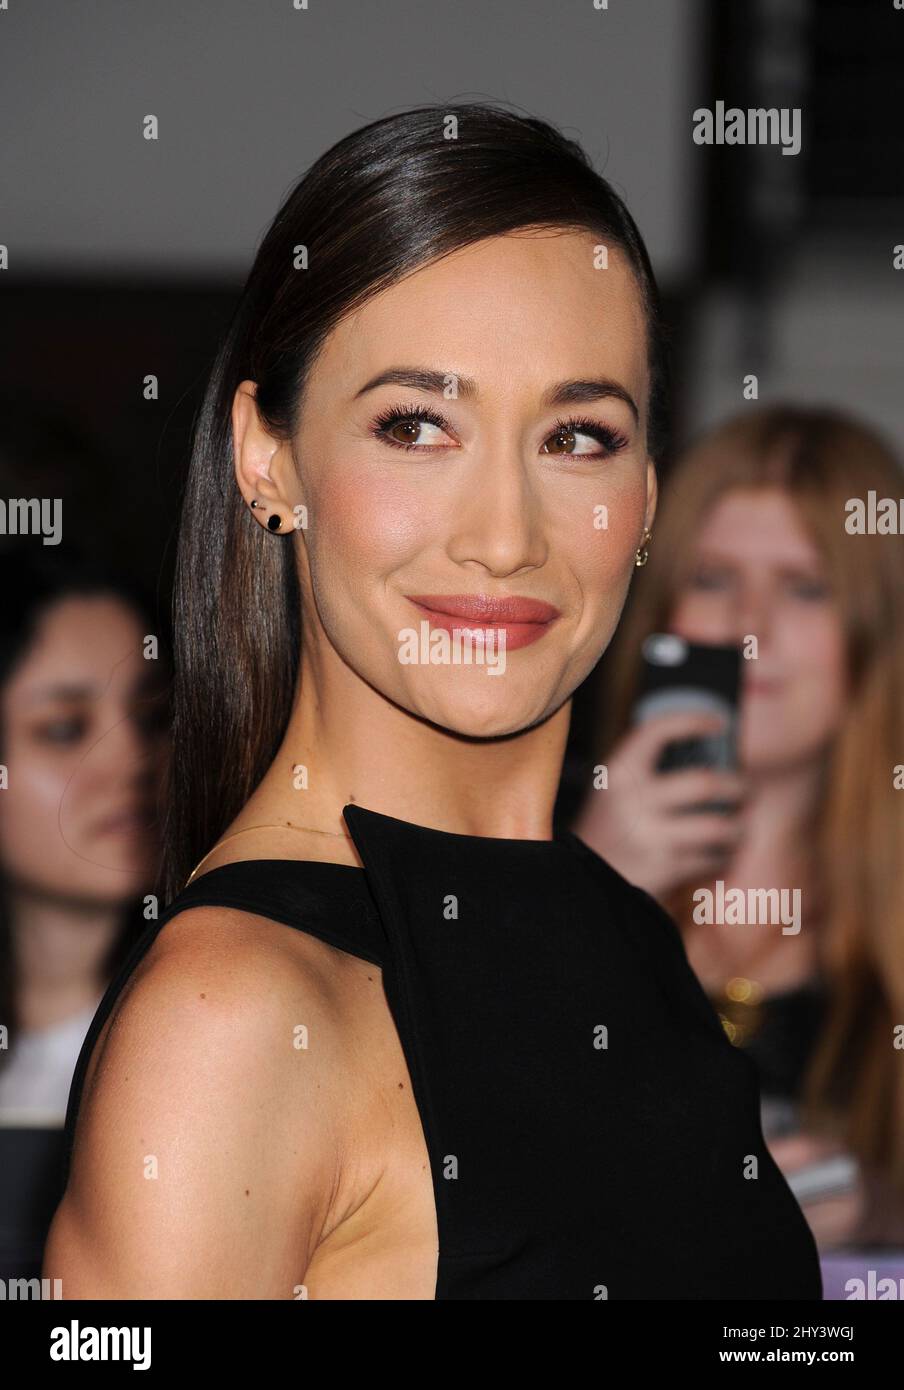 Maggie Q arriving for the Divergent Premiere held at the Regent Bruin Theatre, Los Angeles. Stock Photo